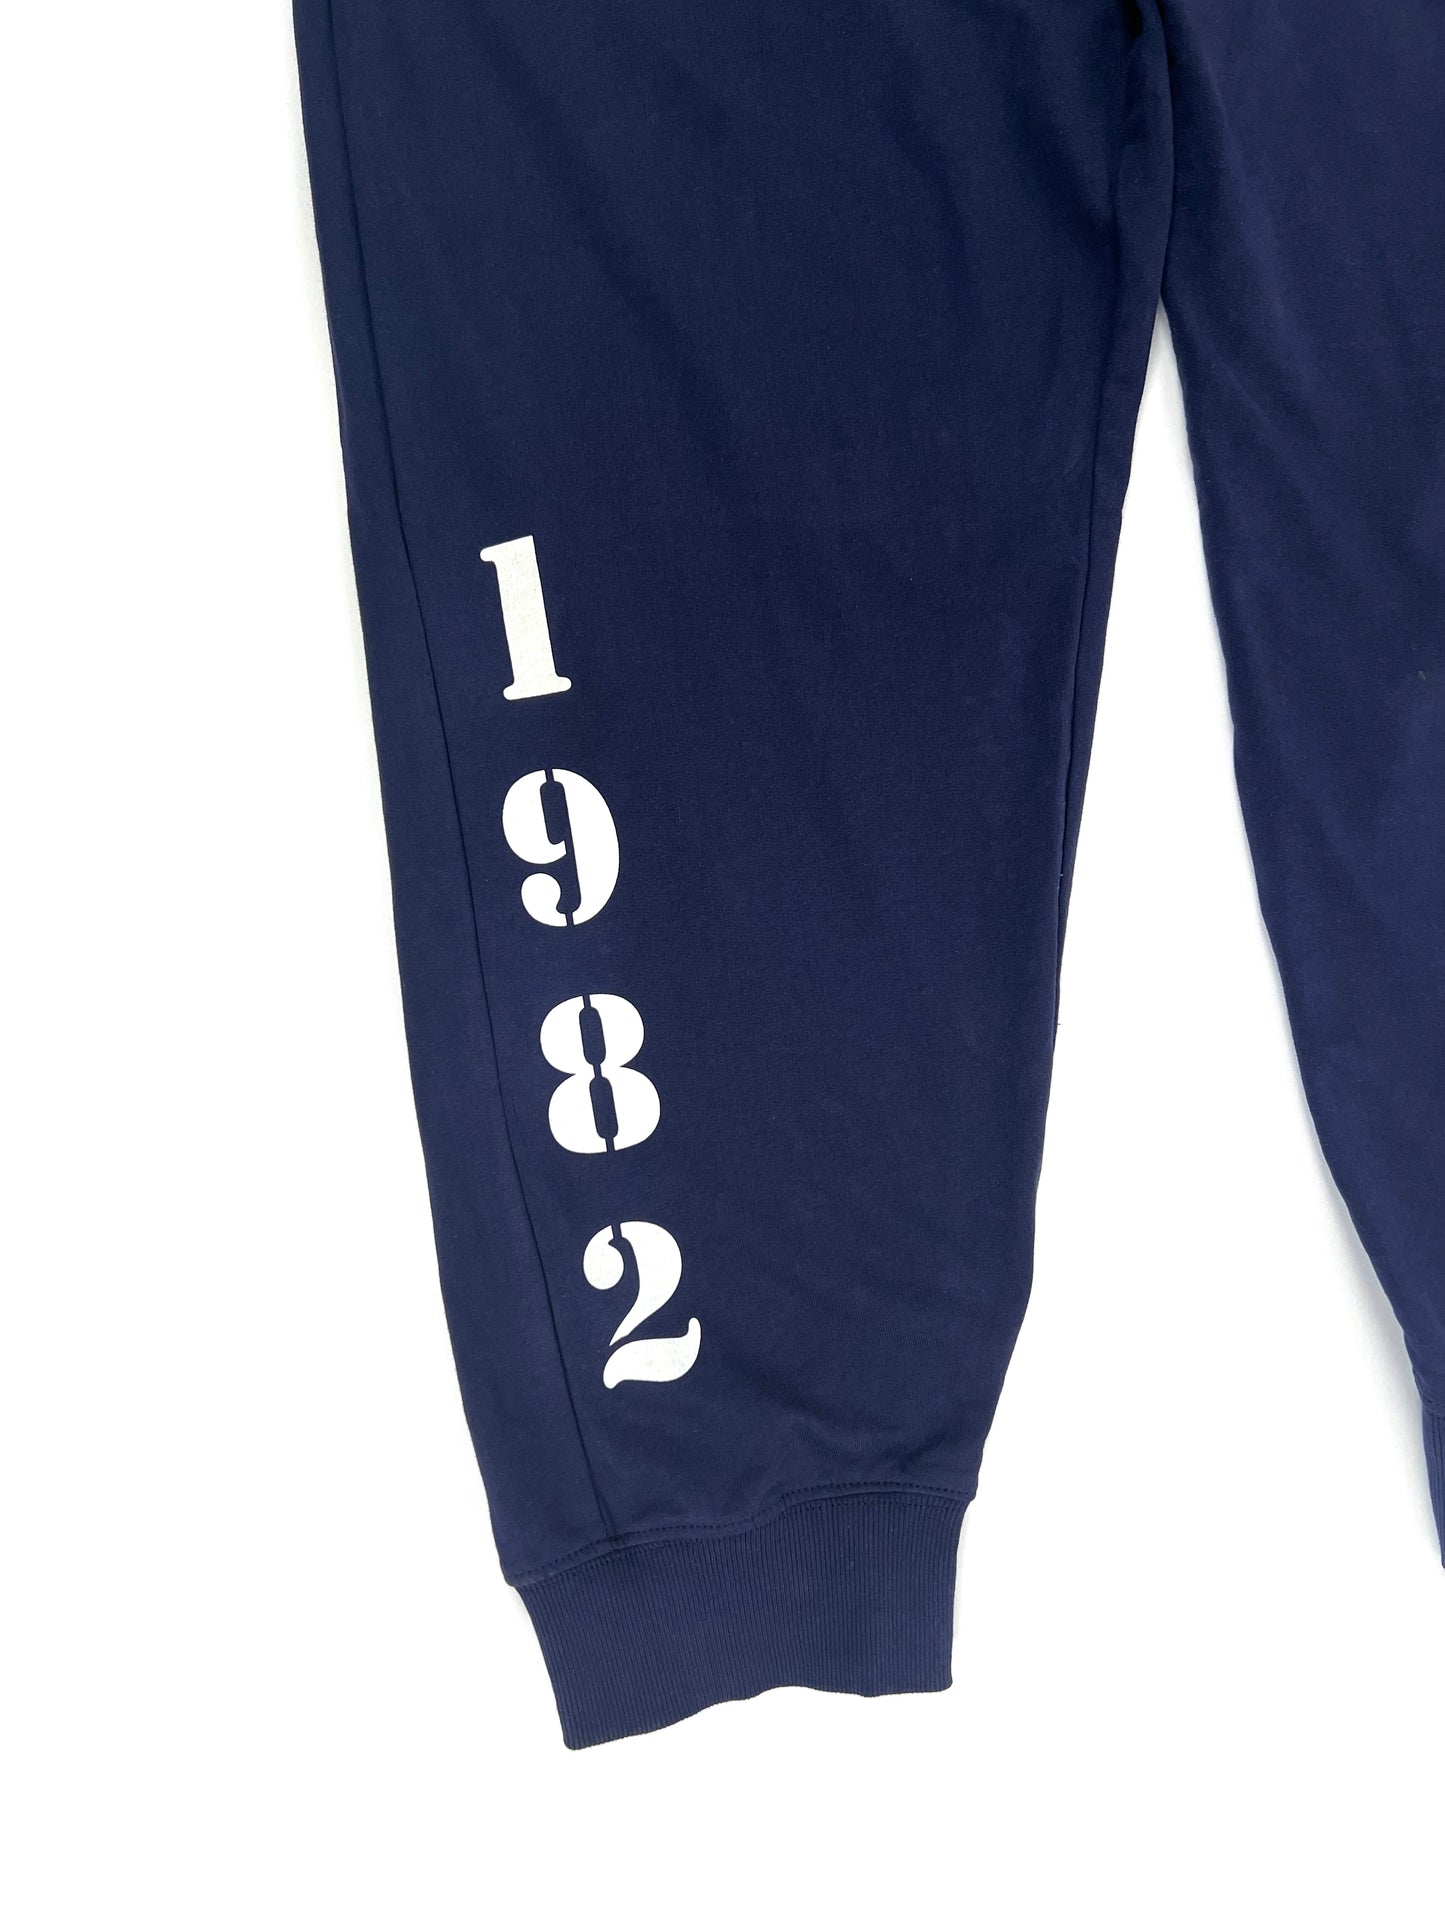 Beverly Hills Polo Club jogger pants in blue